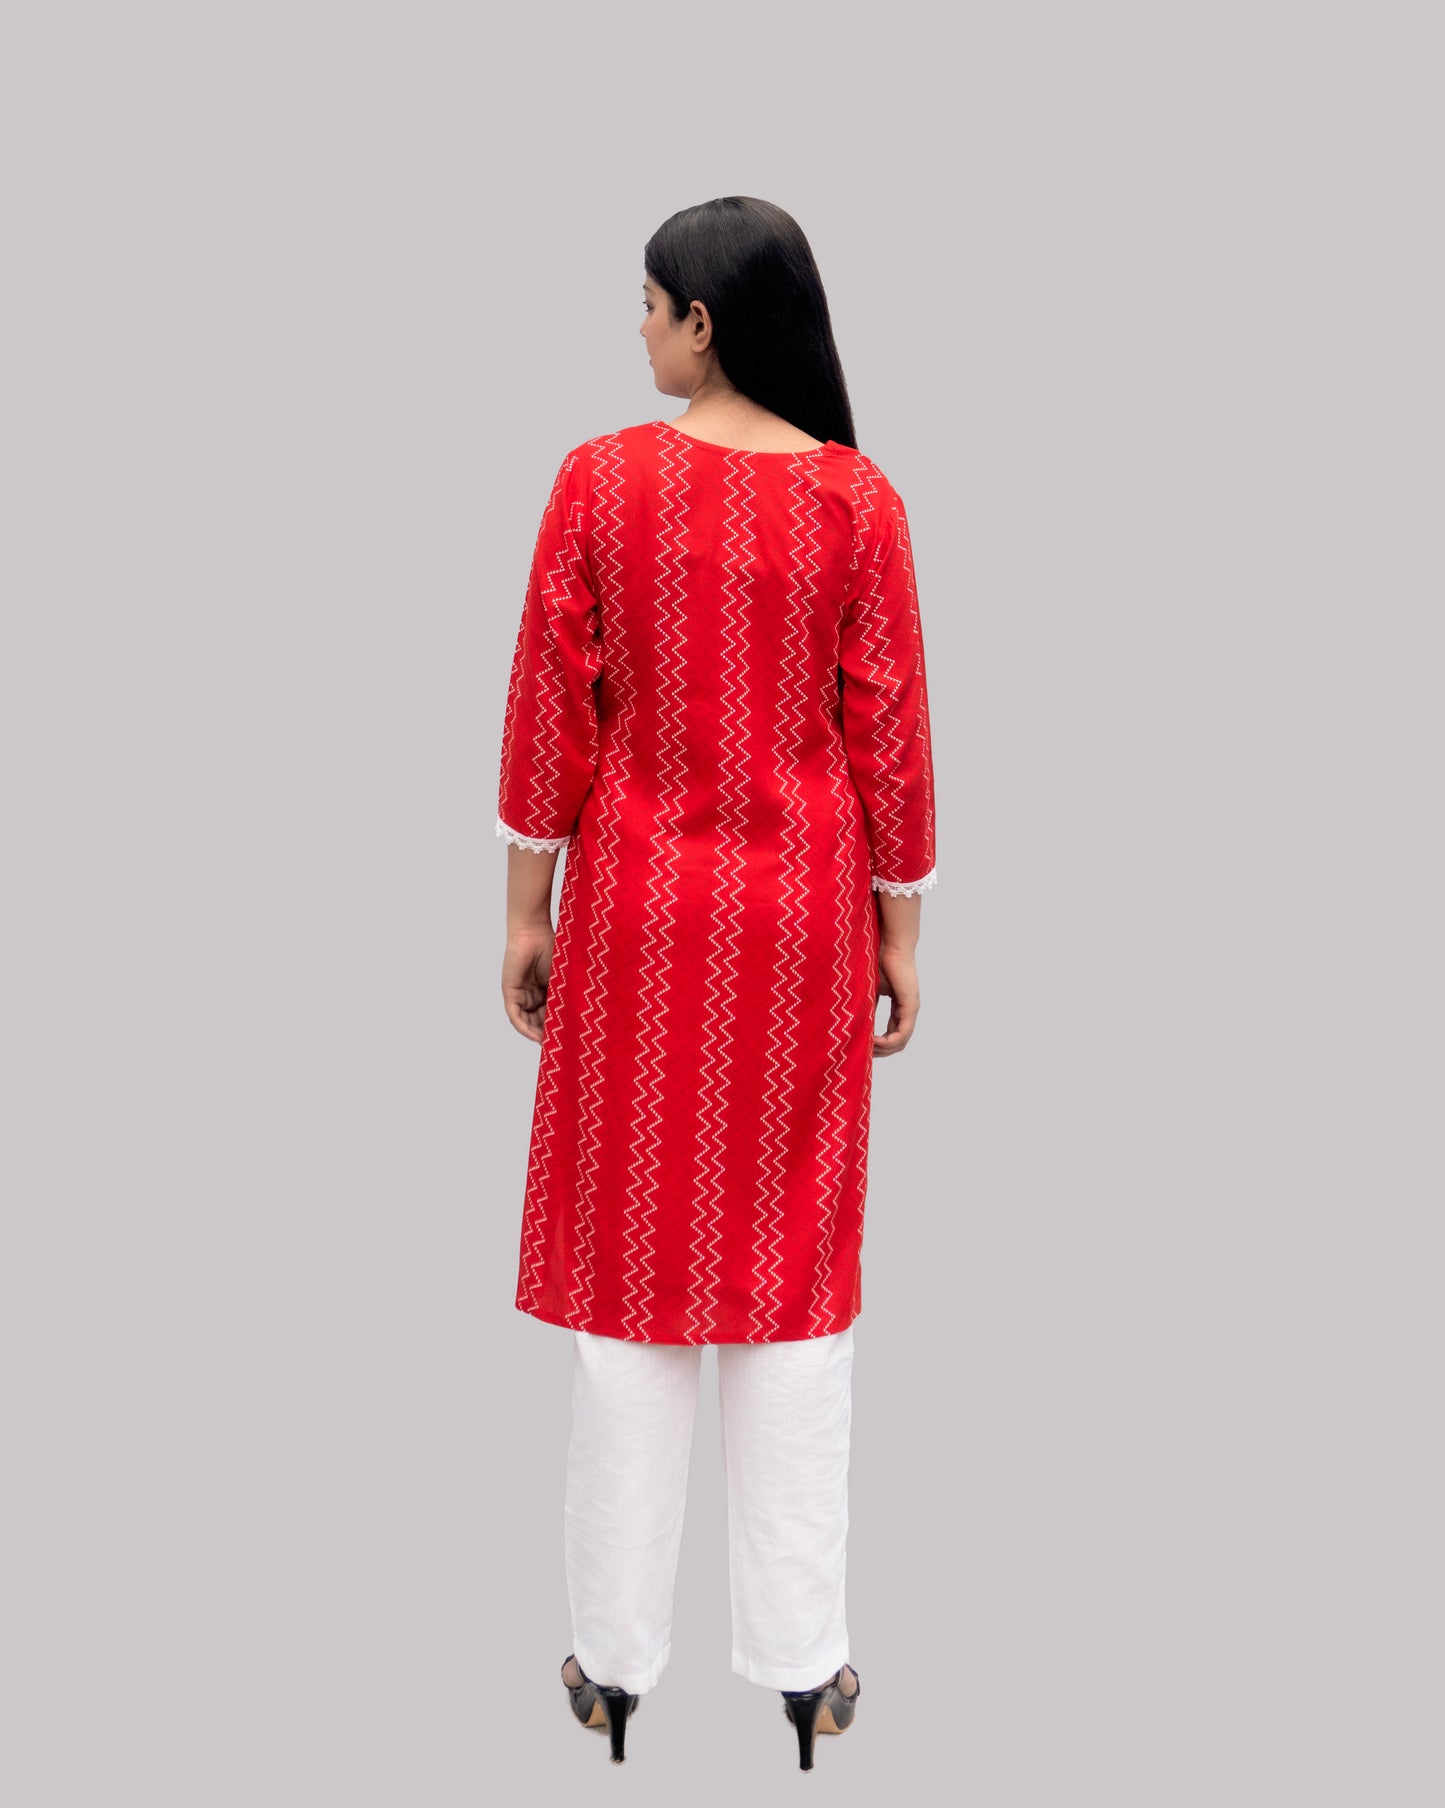 Red Cotton Suit with White Palazzo: Chic Summer Style"